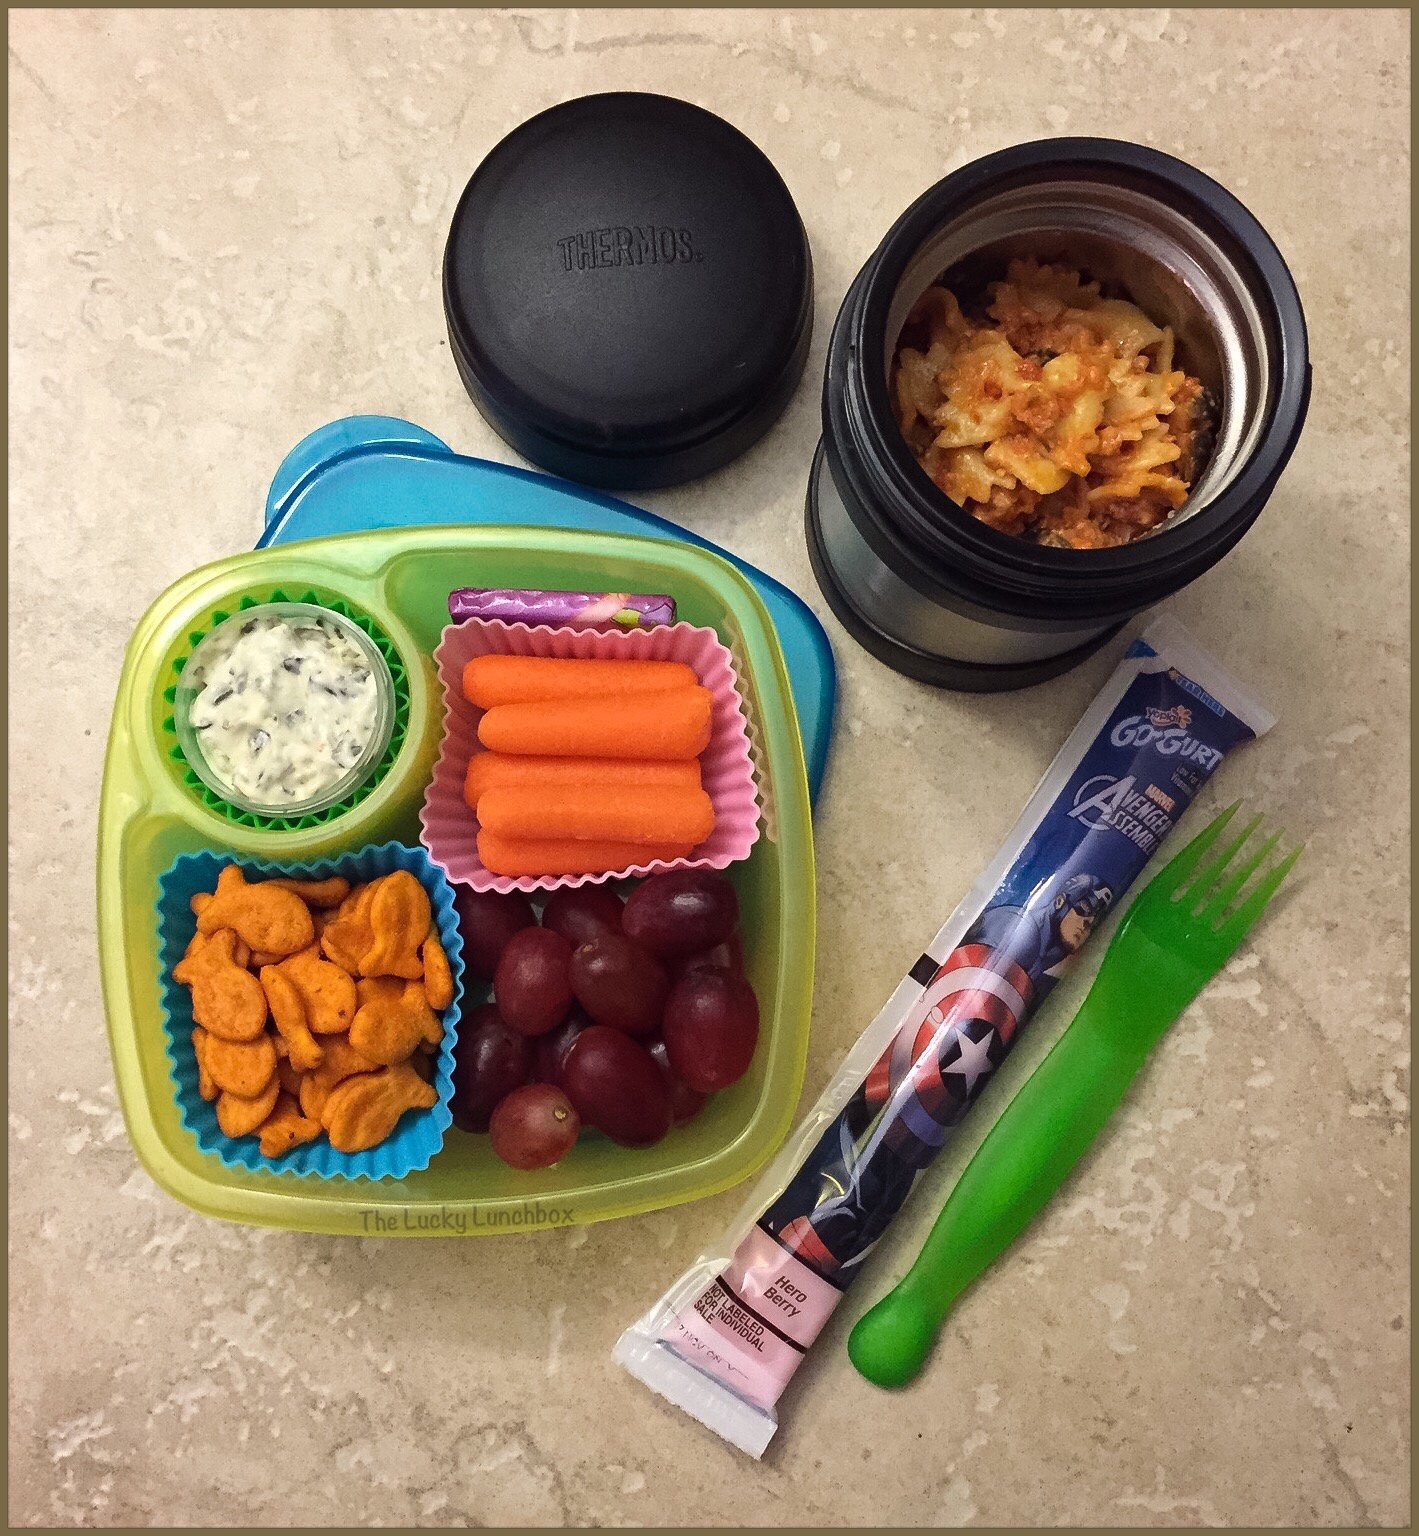 The Lucky Lunchbox: Pizza pasta in a Thermos.